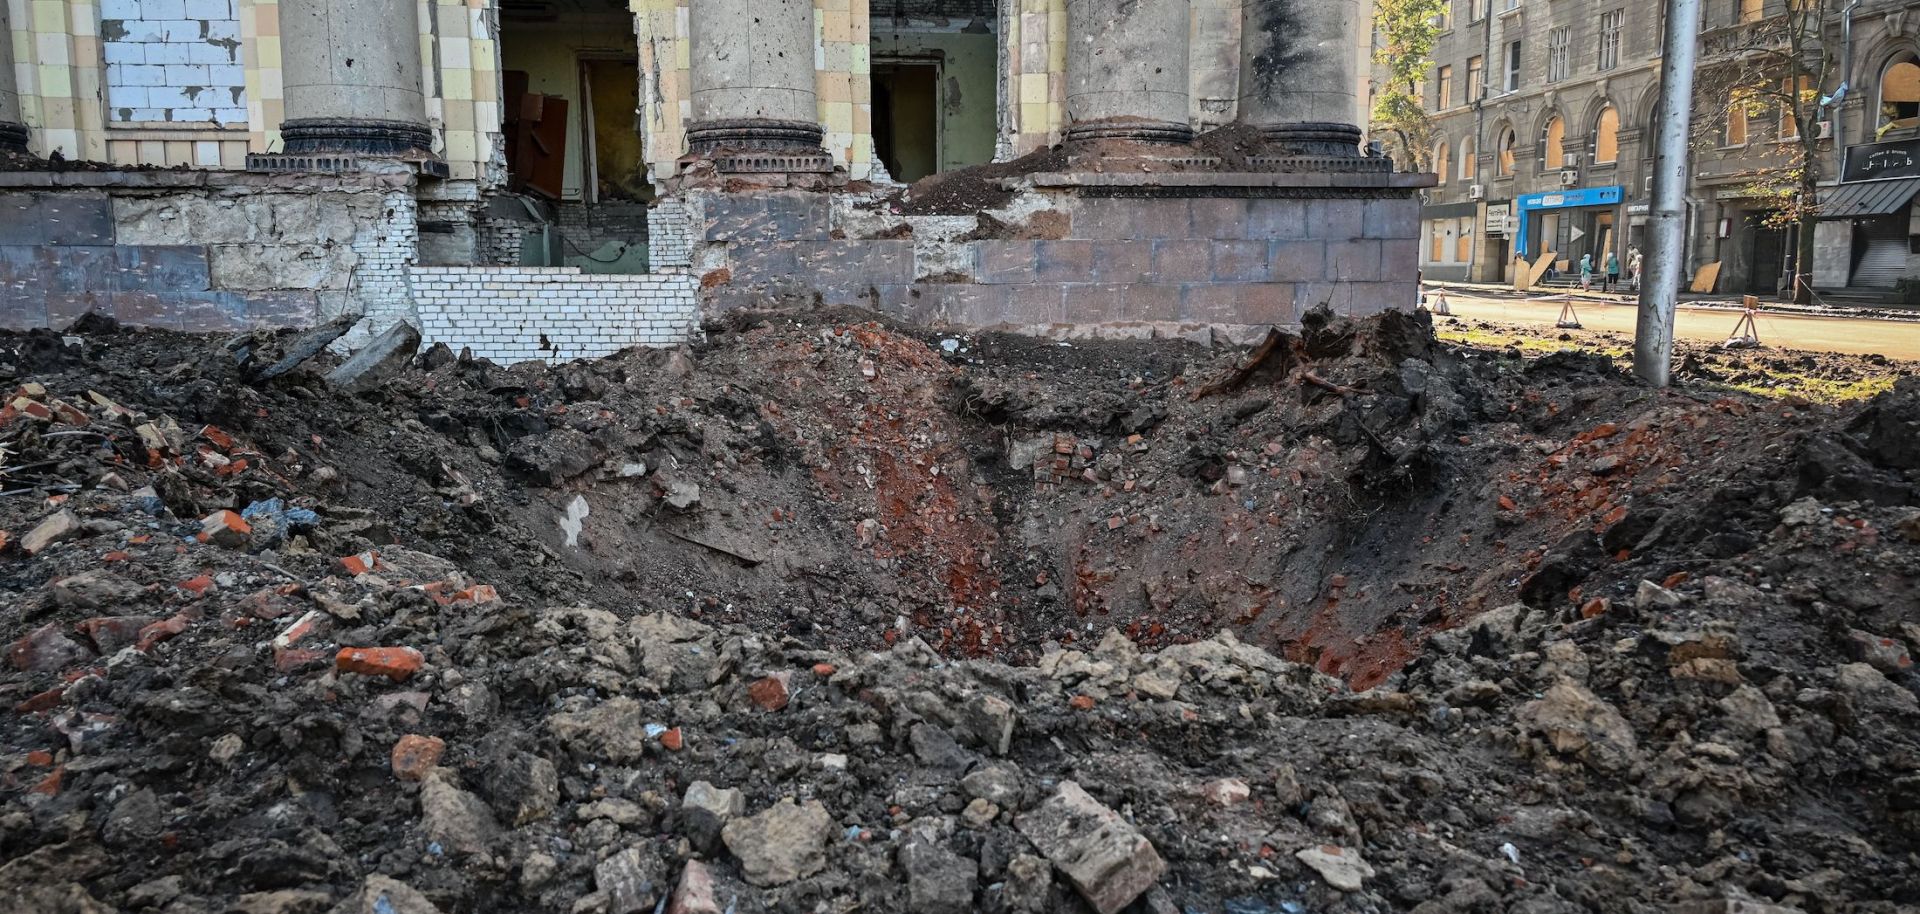 A crater near the damaged headquarters of the Kharkiv administration building following an overnight missile strike Aug. 29, 2022, in Kharkiv, Ukraine.